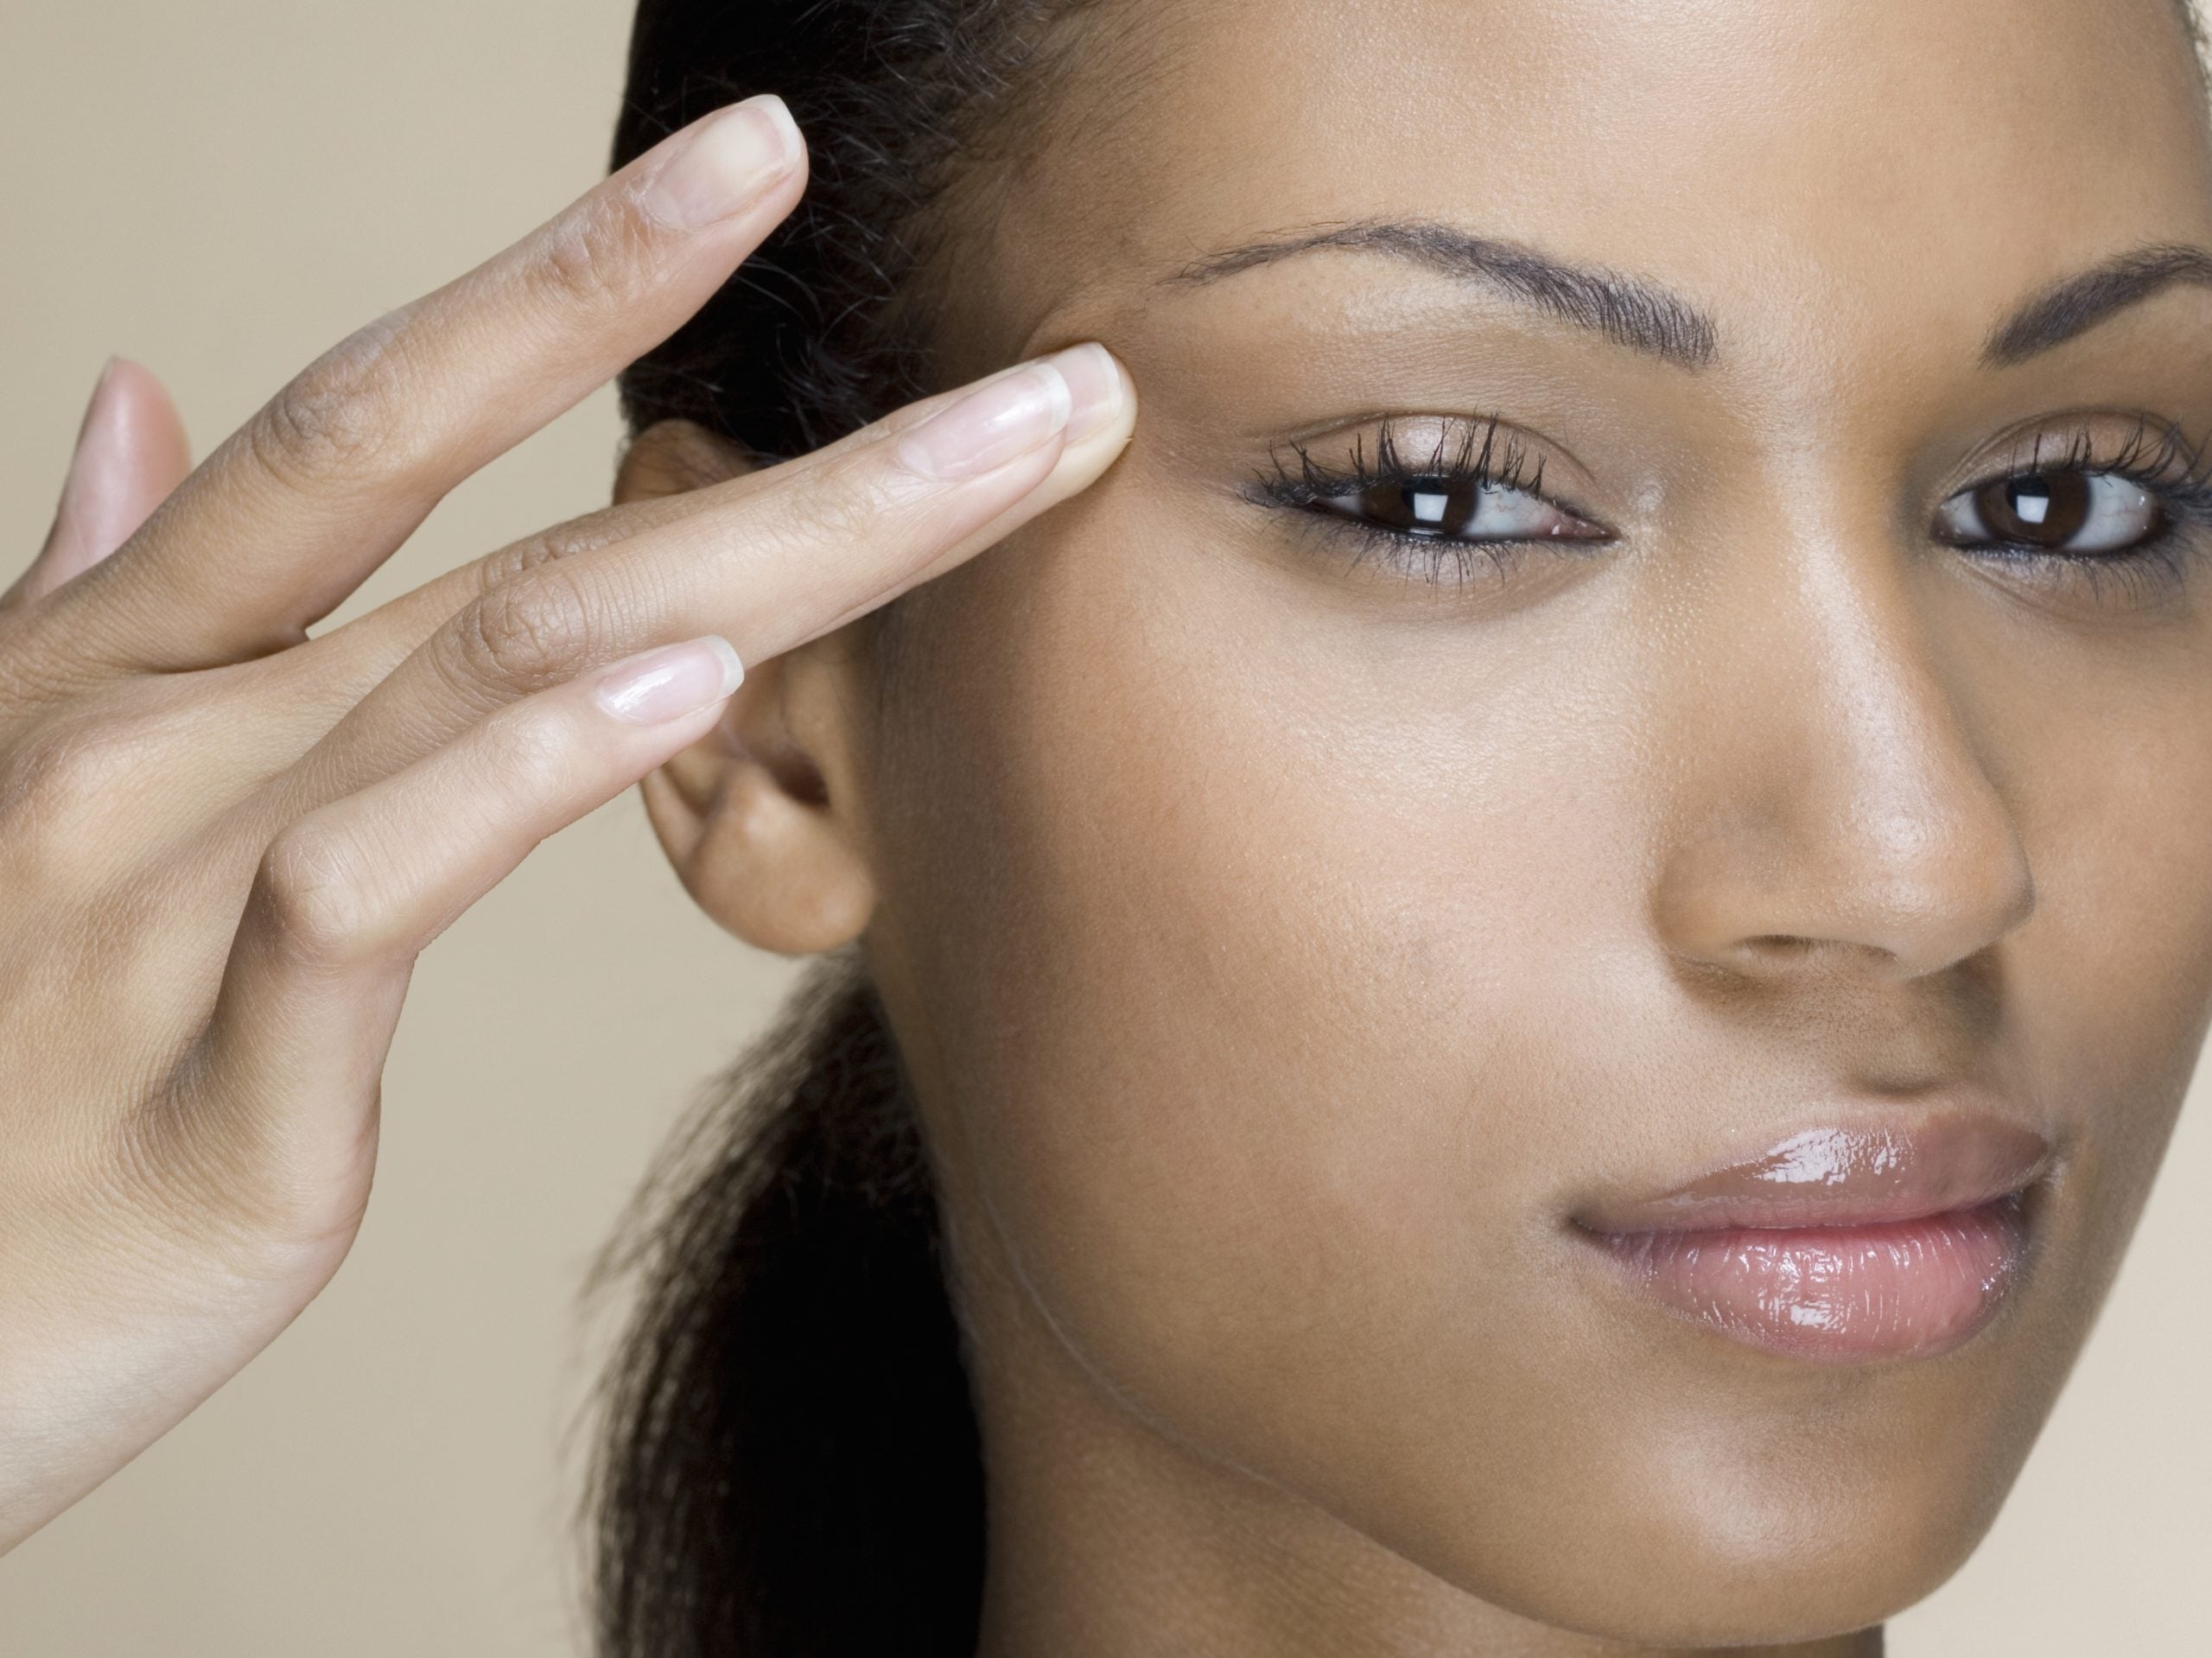 Is Blepharoplasty On The Rise?